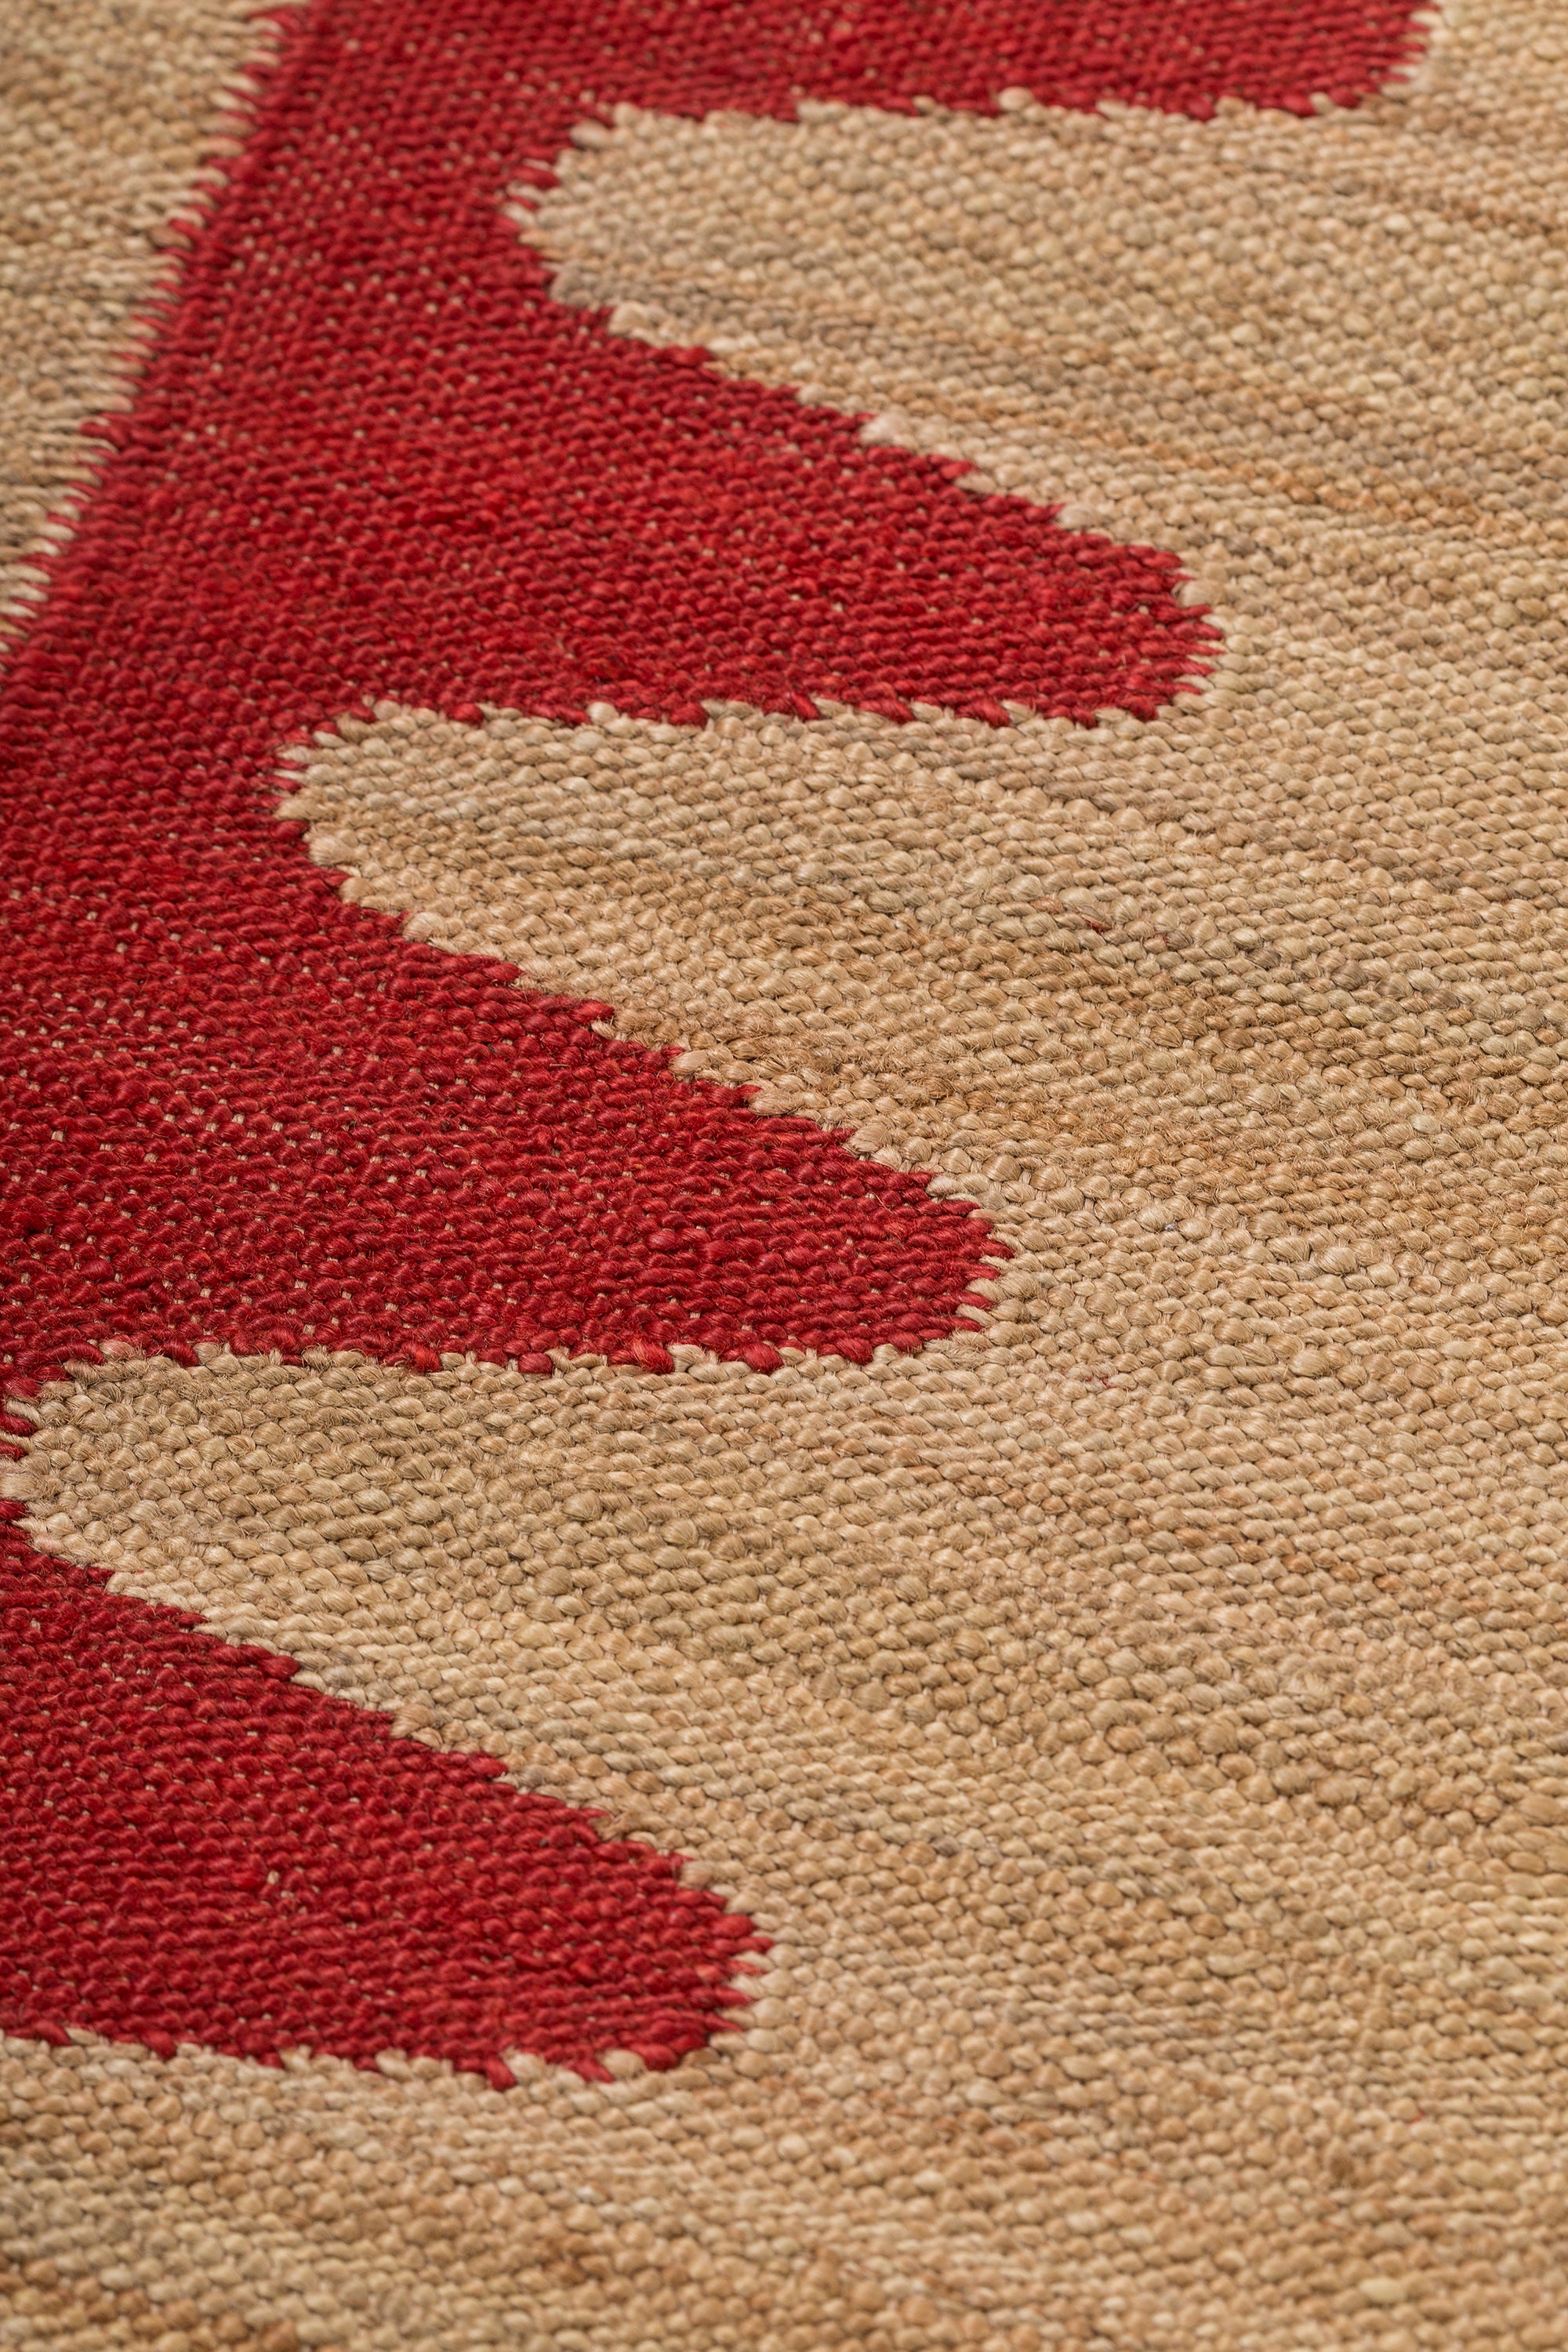 Detail of the Waver Rug in Safflower Red, a strated ecru field with a red flame stitch border. 